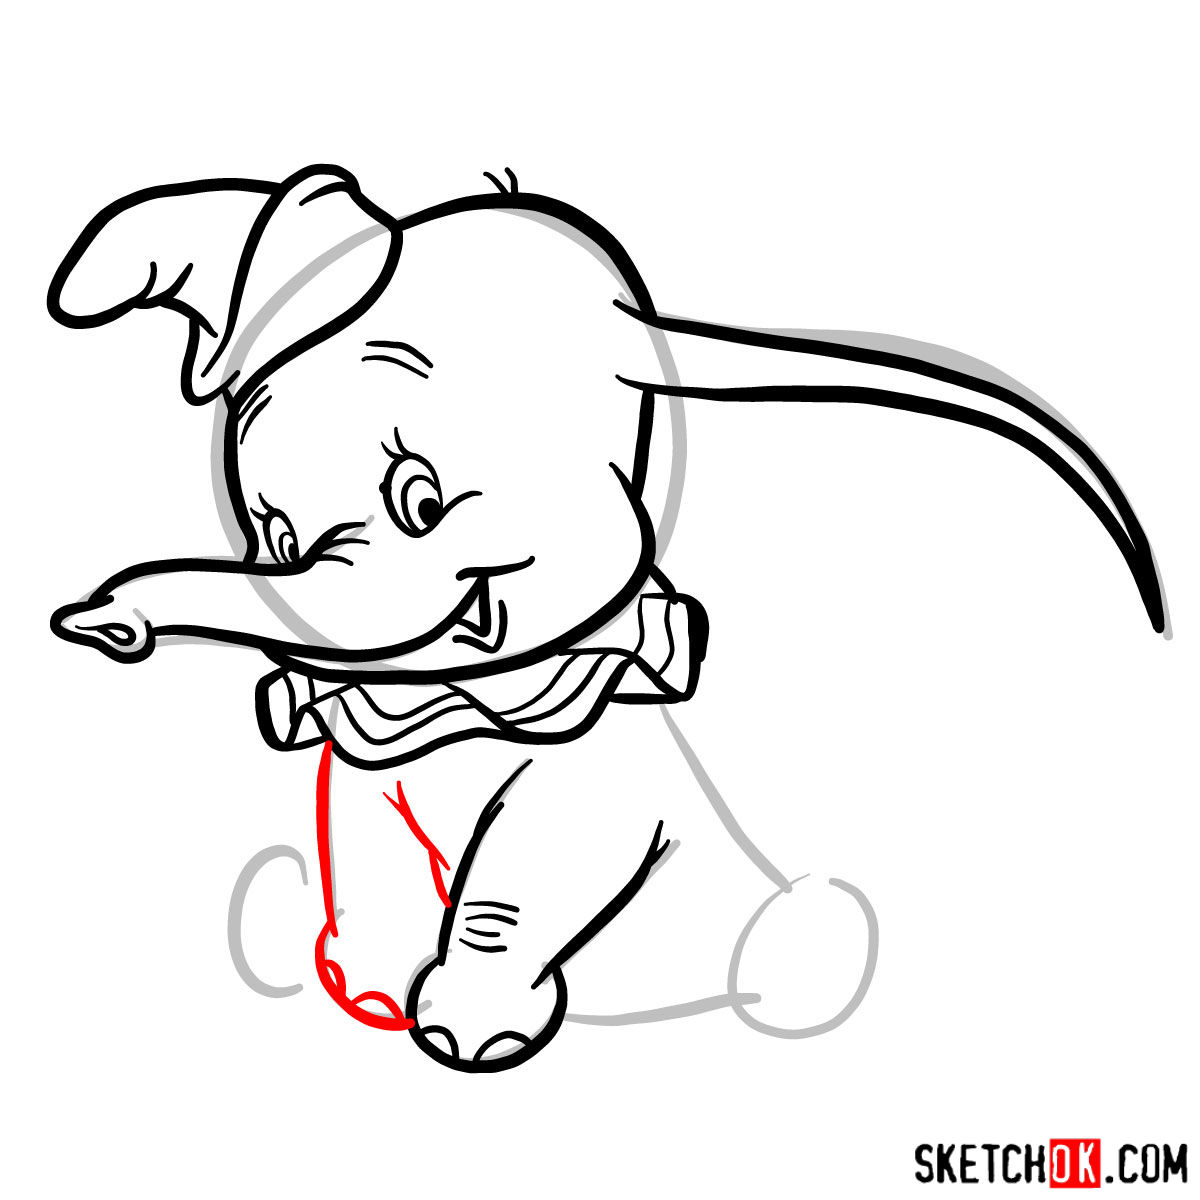 How to draw Dumbo the elephant - step 07